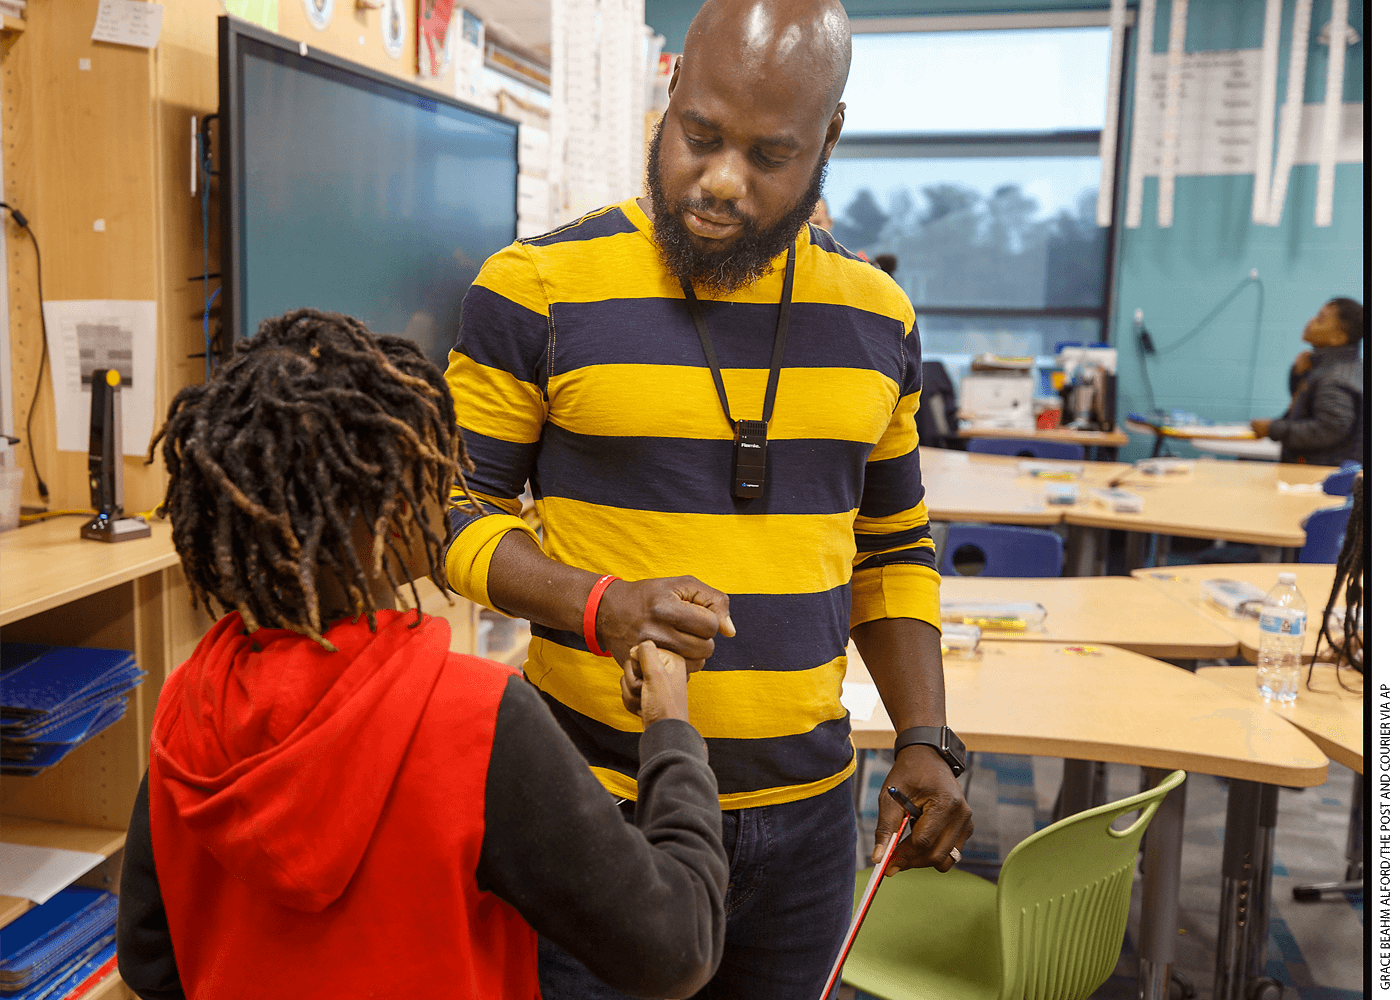 Teacher Tyler White congratulates a 4th-grade student at Stono Park Elementary School in Charleston, South Carolina. The county aims to hire 60 more Black teachers by 2025.